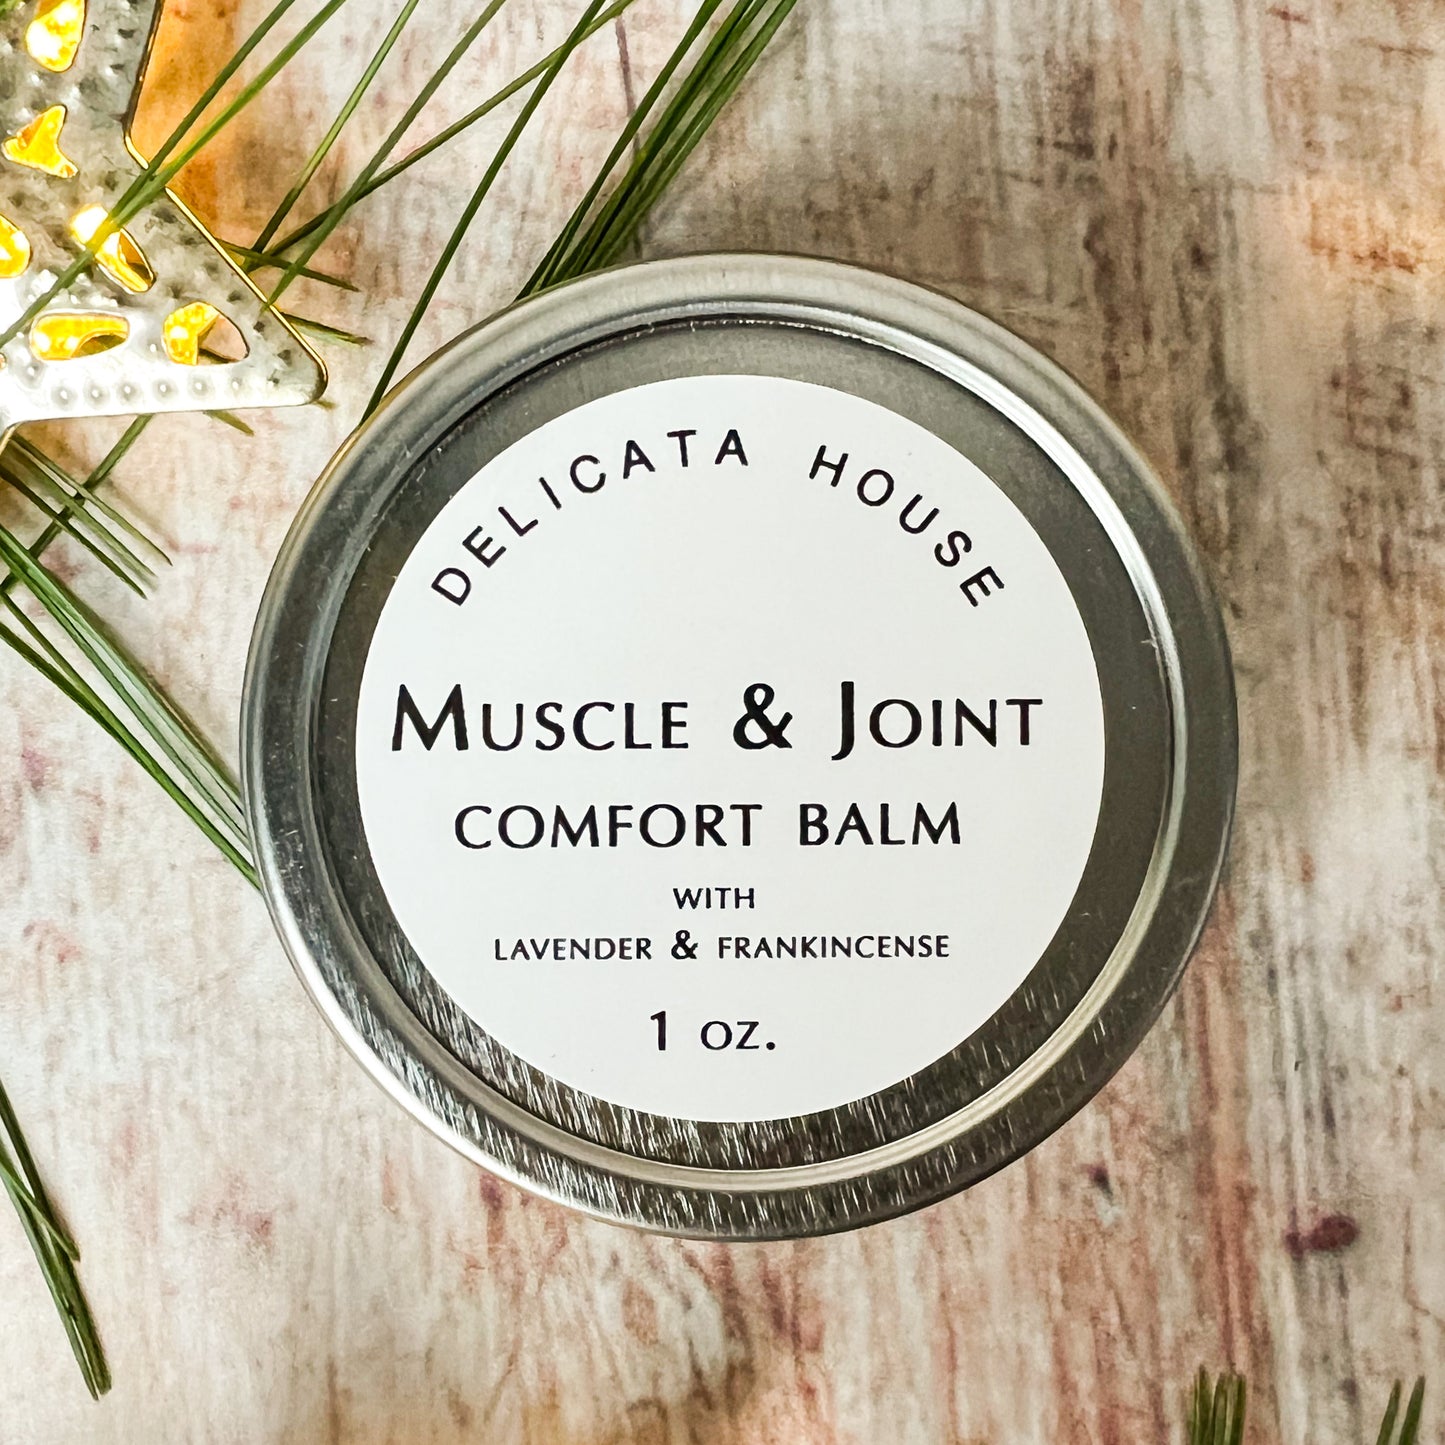 Muscle & Joint Comfort Balm 1 oz - Muscle Rub - Pain Relief Balm - Sore Muscle Rub - Joint Balm